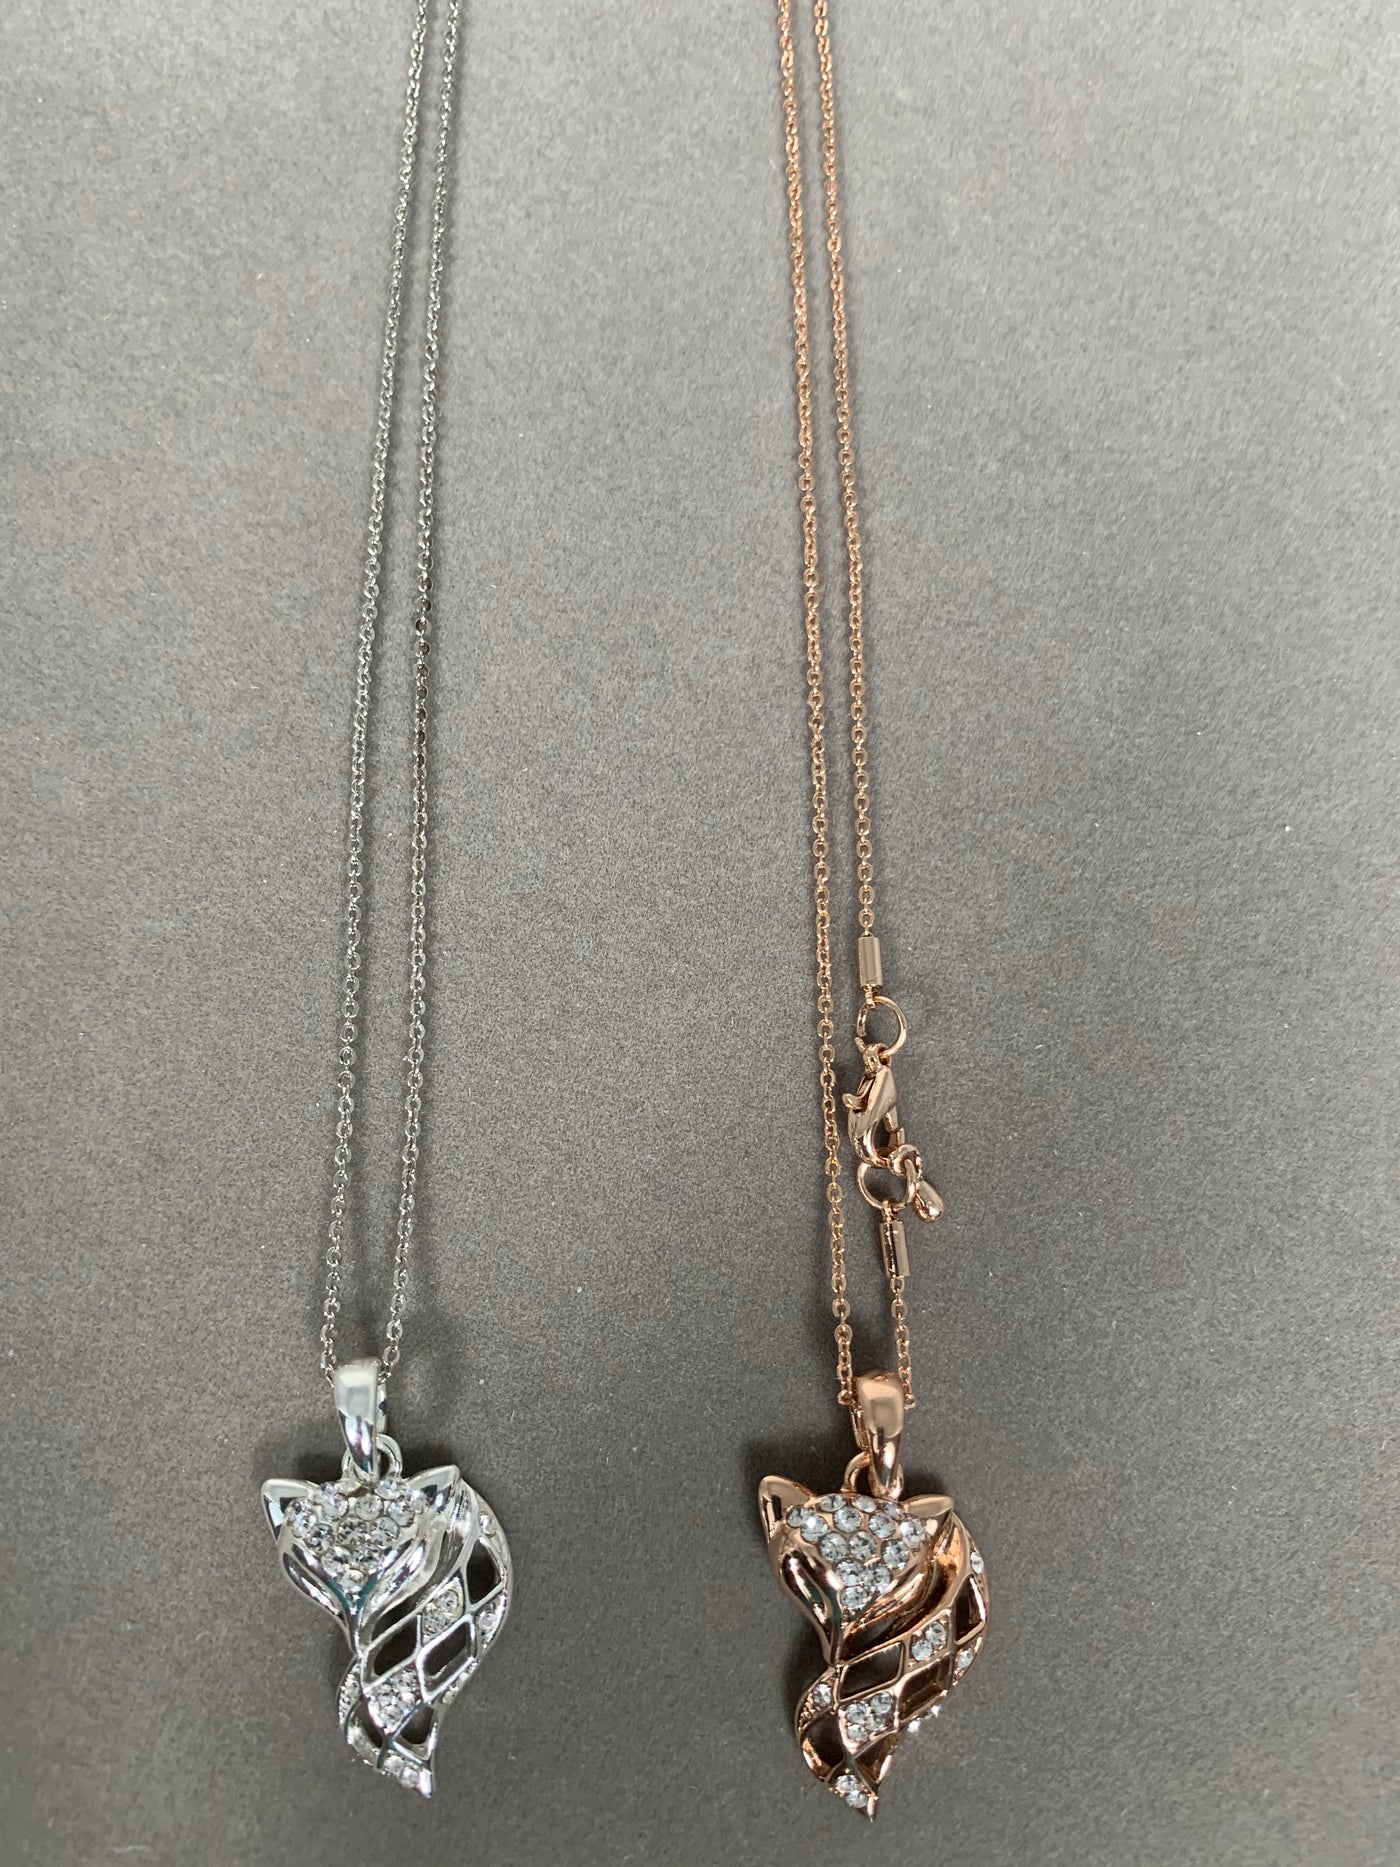 Yellow Gold Tone Fox Pendant Necklace Decorated with Crystals